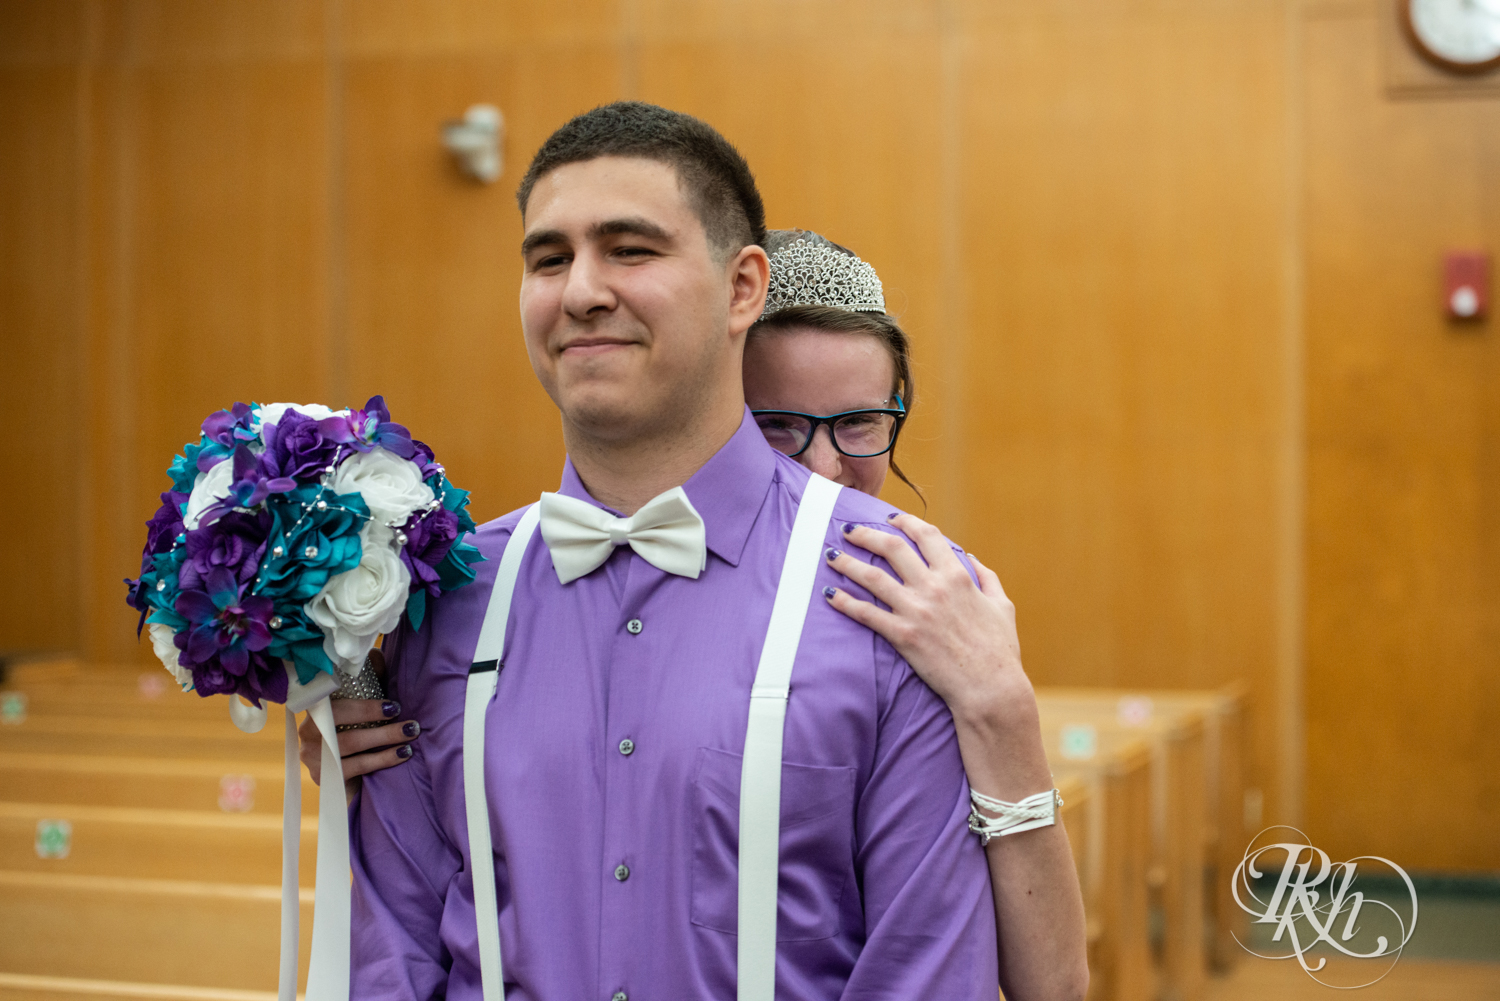 Bride and groom share first look in Chippewa Falls Courthouse in Chippewa Falls, Wisconsin. 